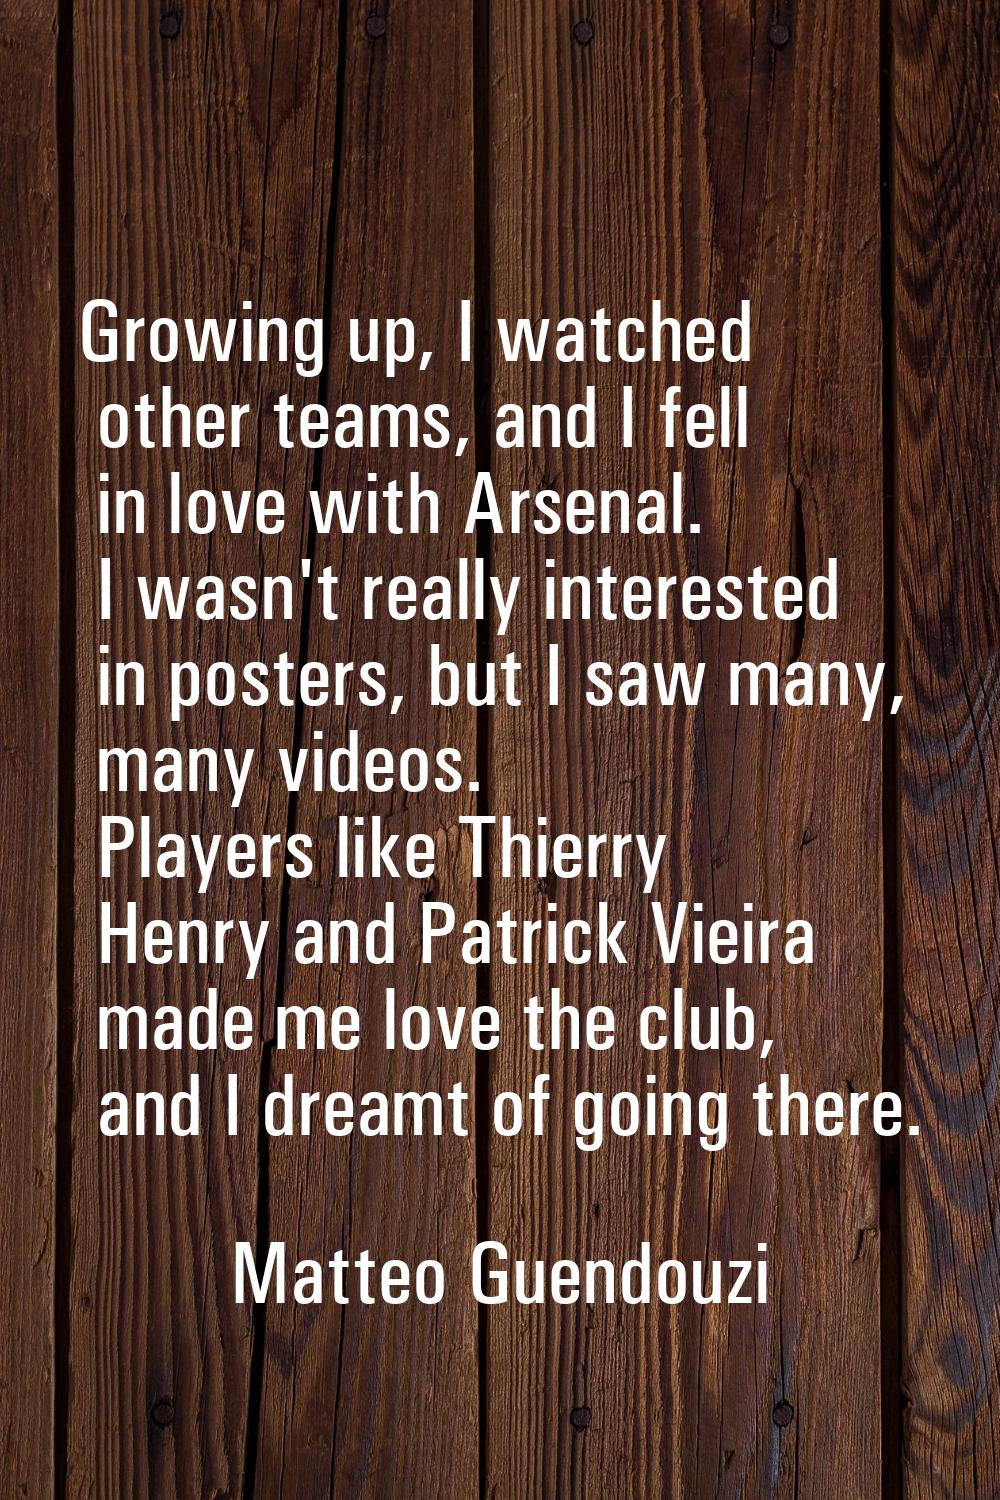 Growing up, I watched other teams, and I fell in love with Arsenal. I wasn't really interested in p